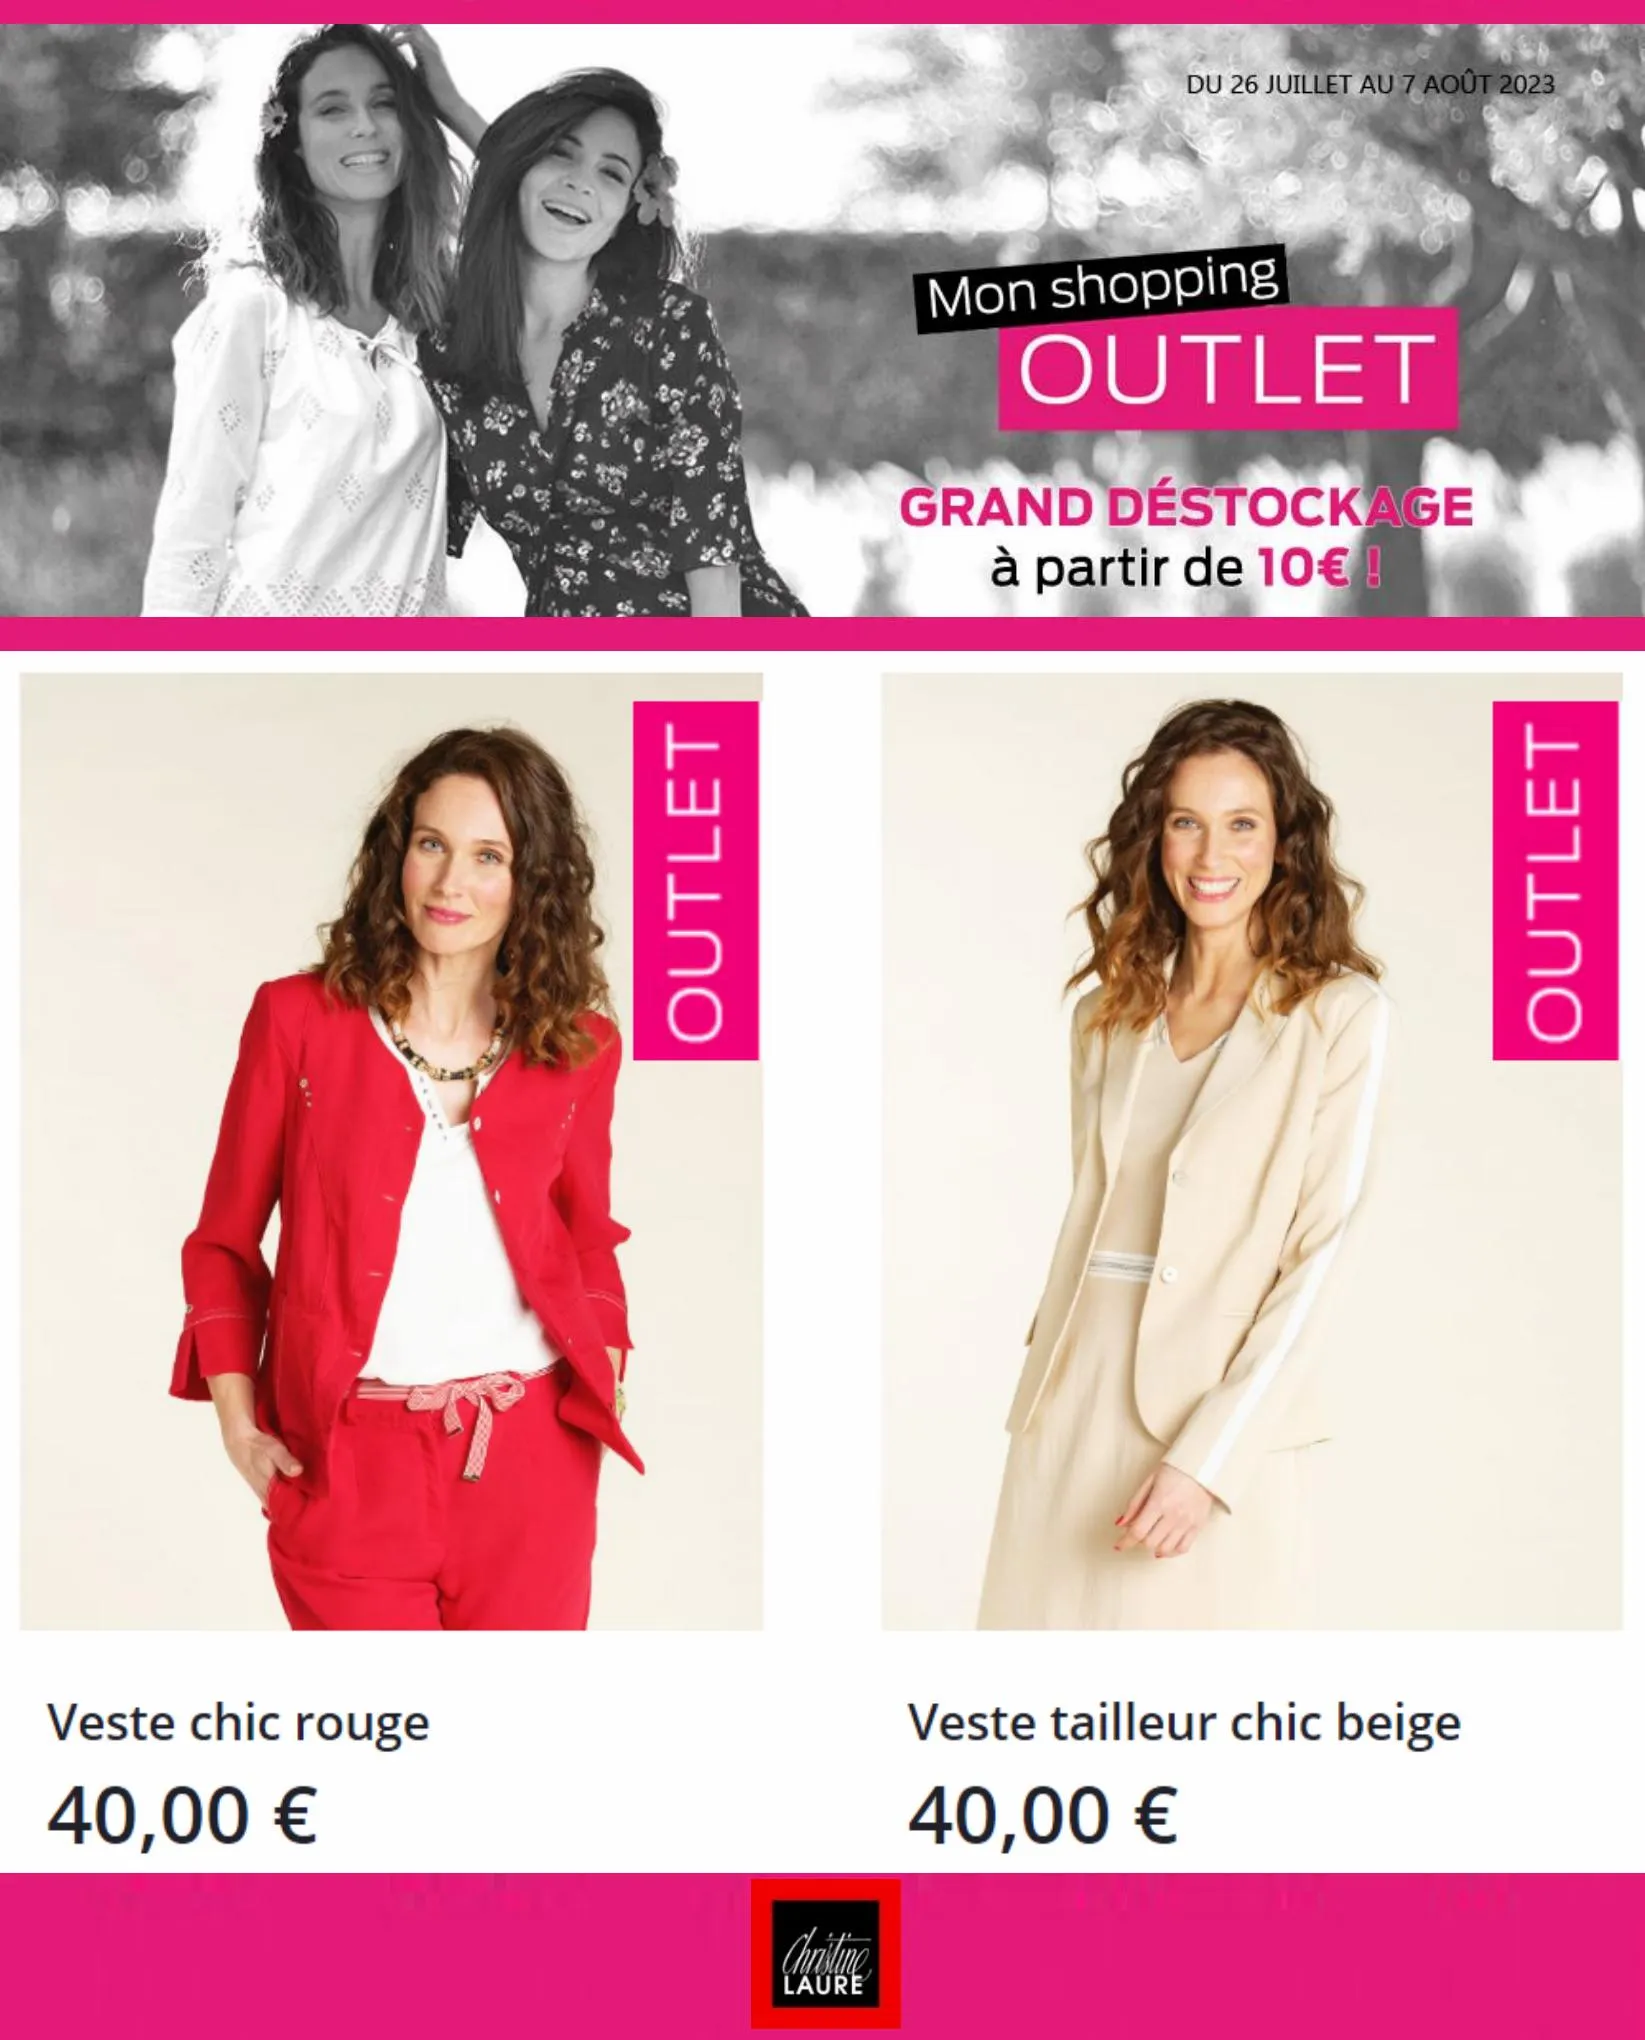 Catalogue Mon Shopping Outlet, page 00006